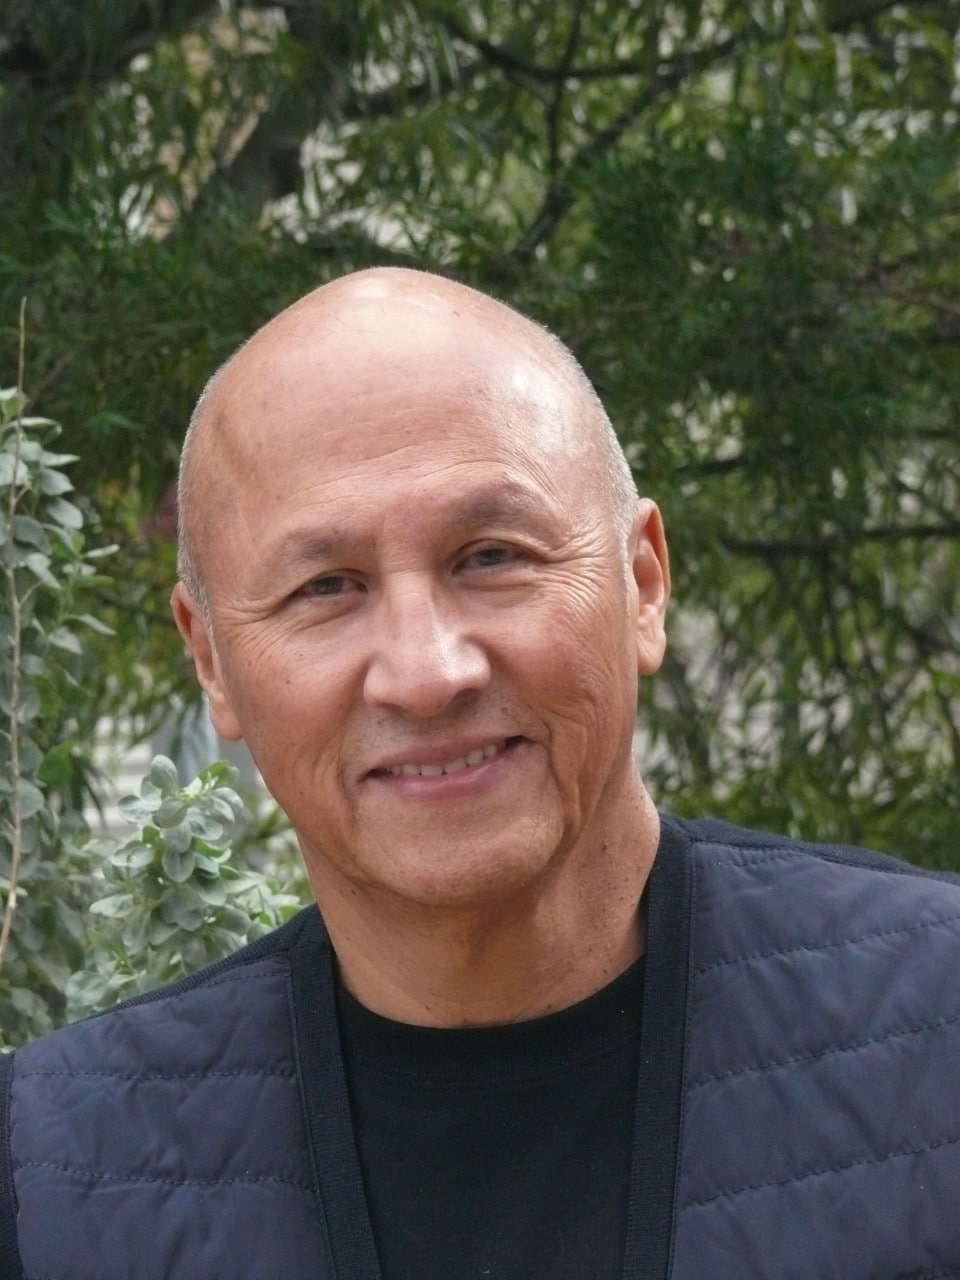 a tight headshot of a middle aged man smiling at the camera, he is bald